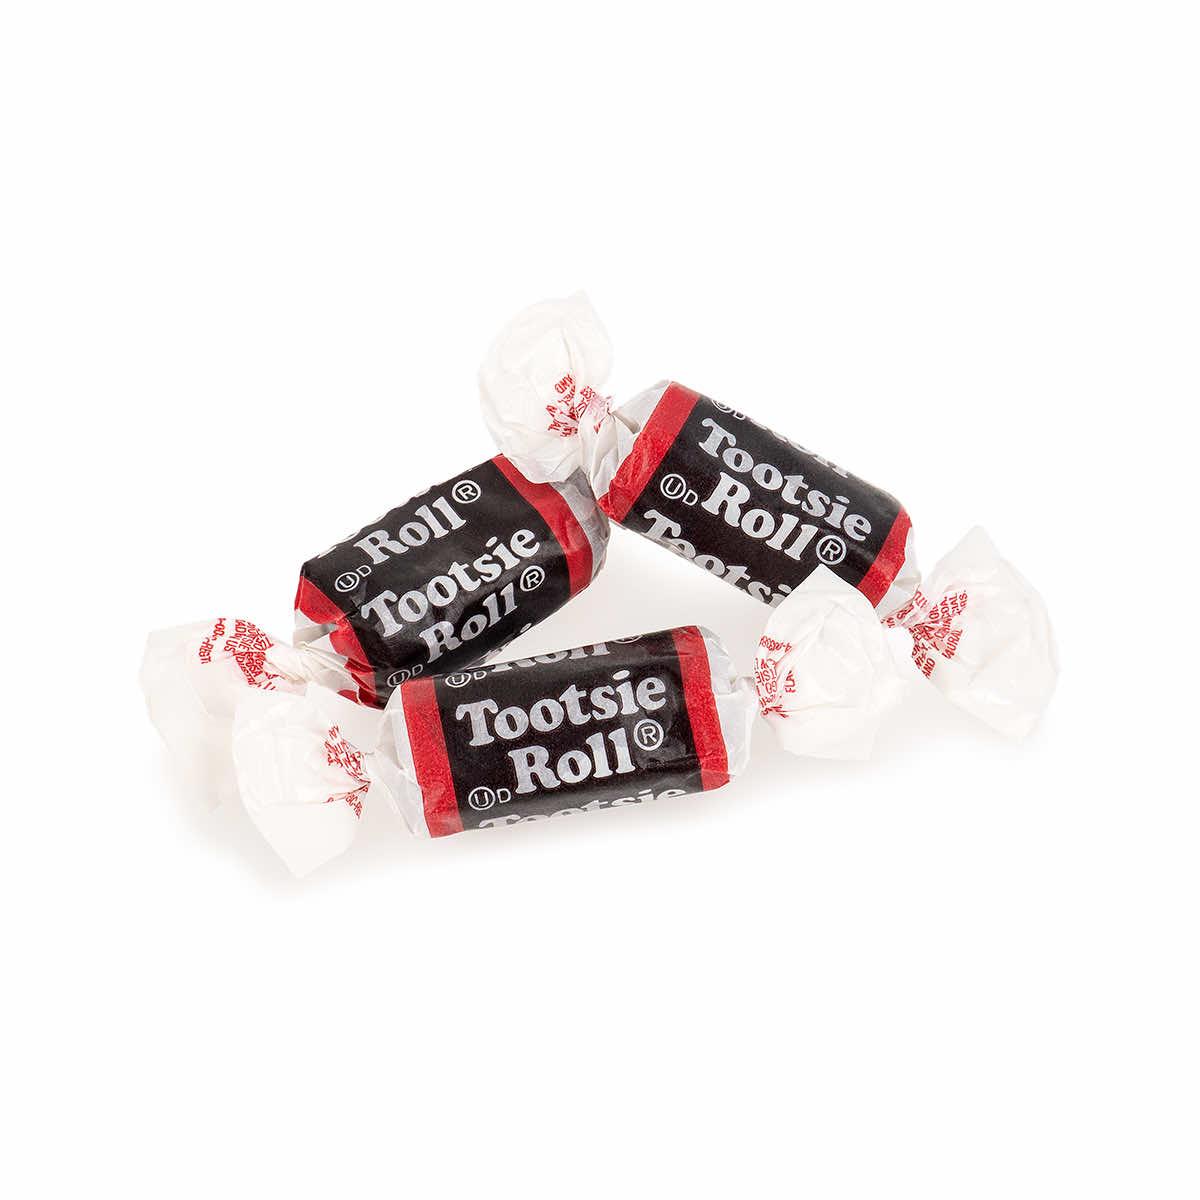 Candy tootsie roll